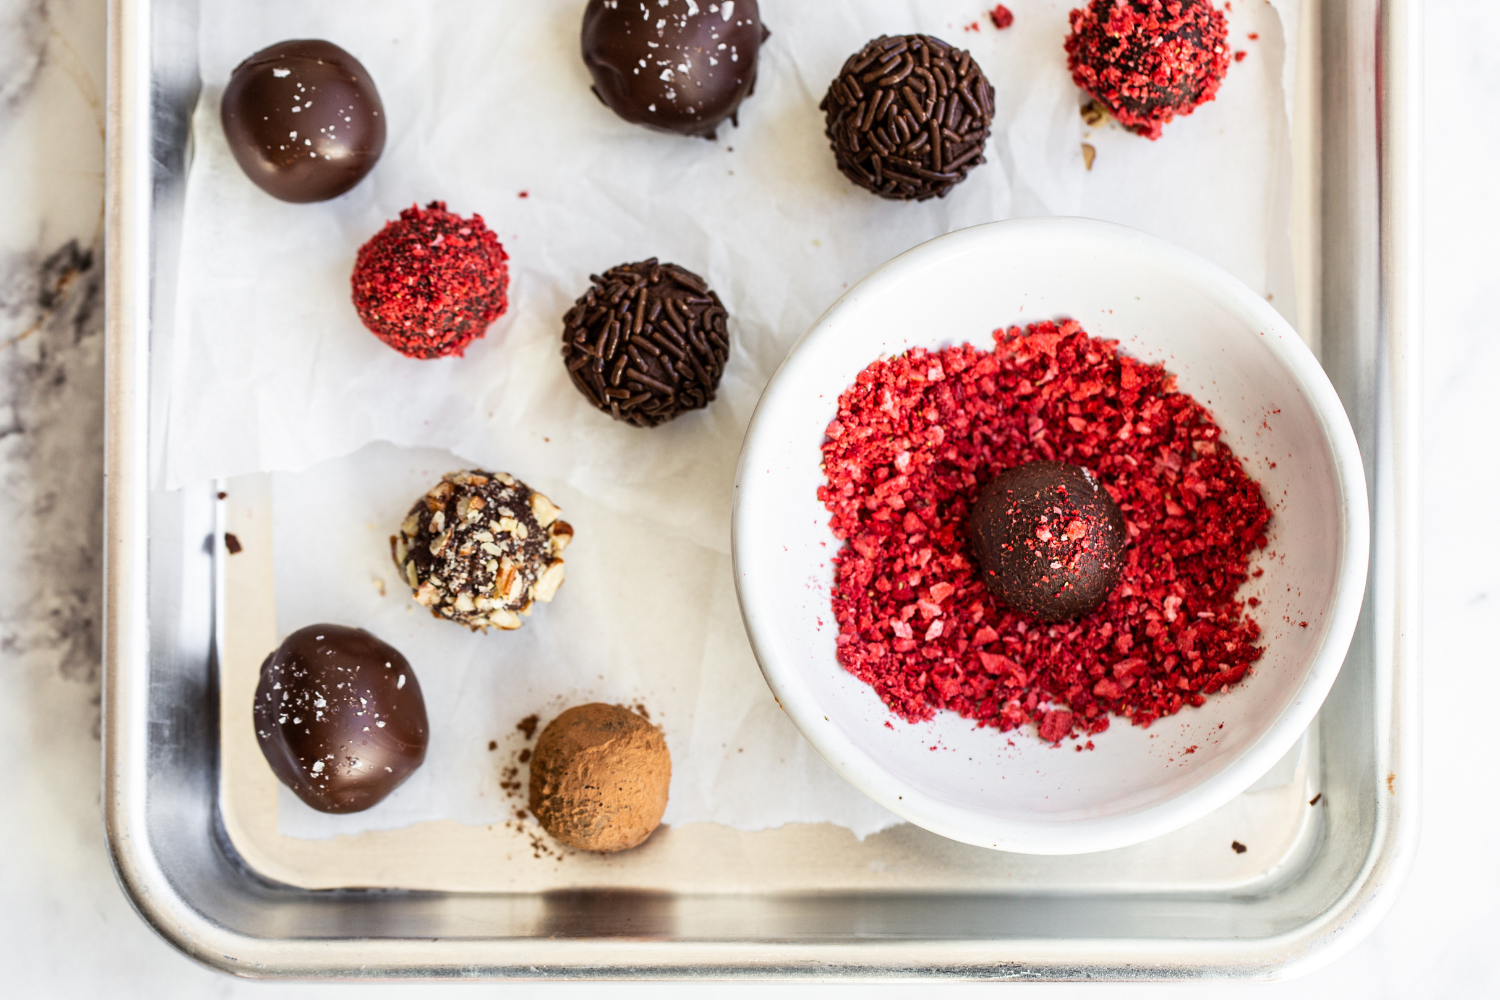 a tray of truffles coated in nuts or chocolate sprinkles, with one truffle being coated in crushed freeze-dried raspberries.